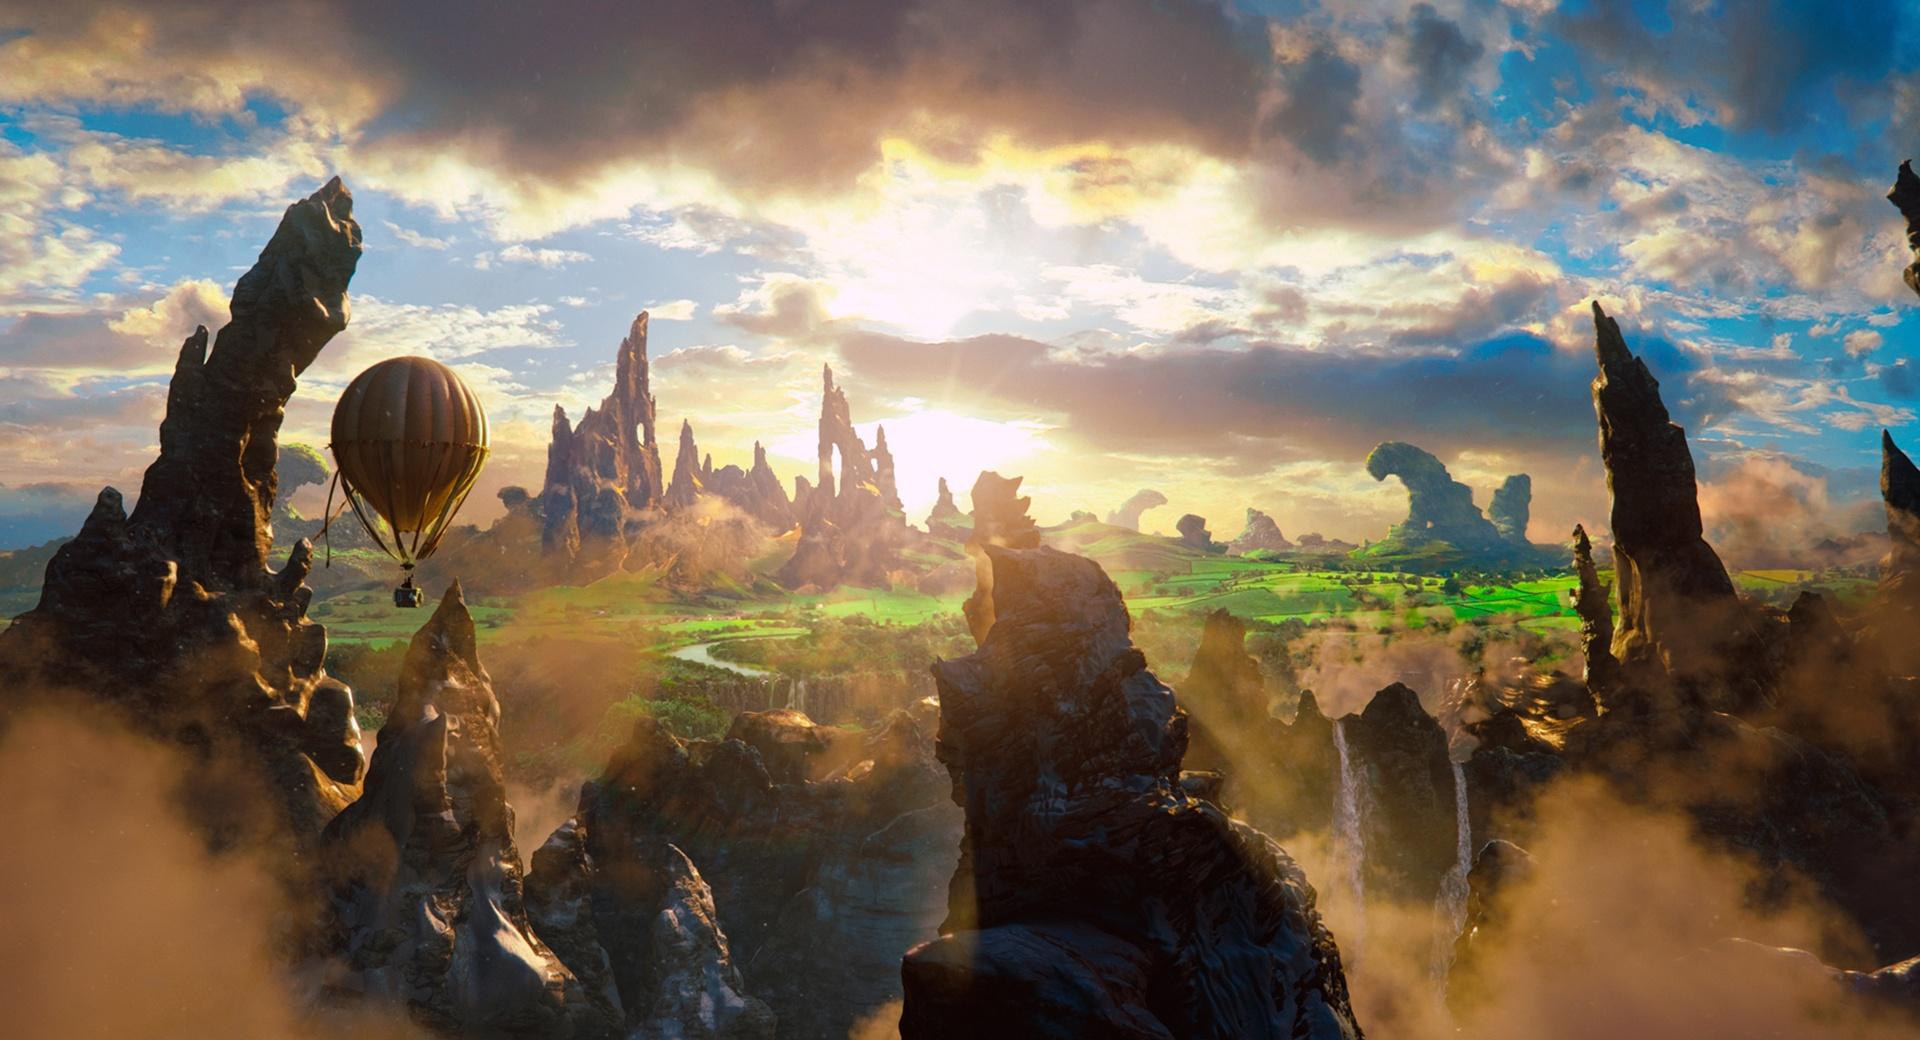 Oz The Great and Powerful Concept Art wallpapers HD quality